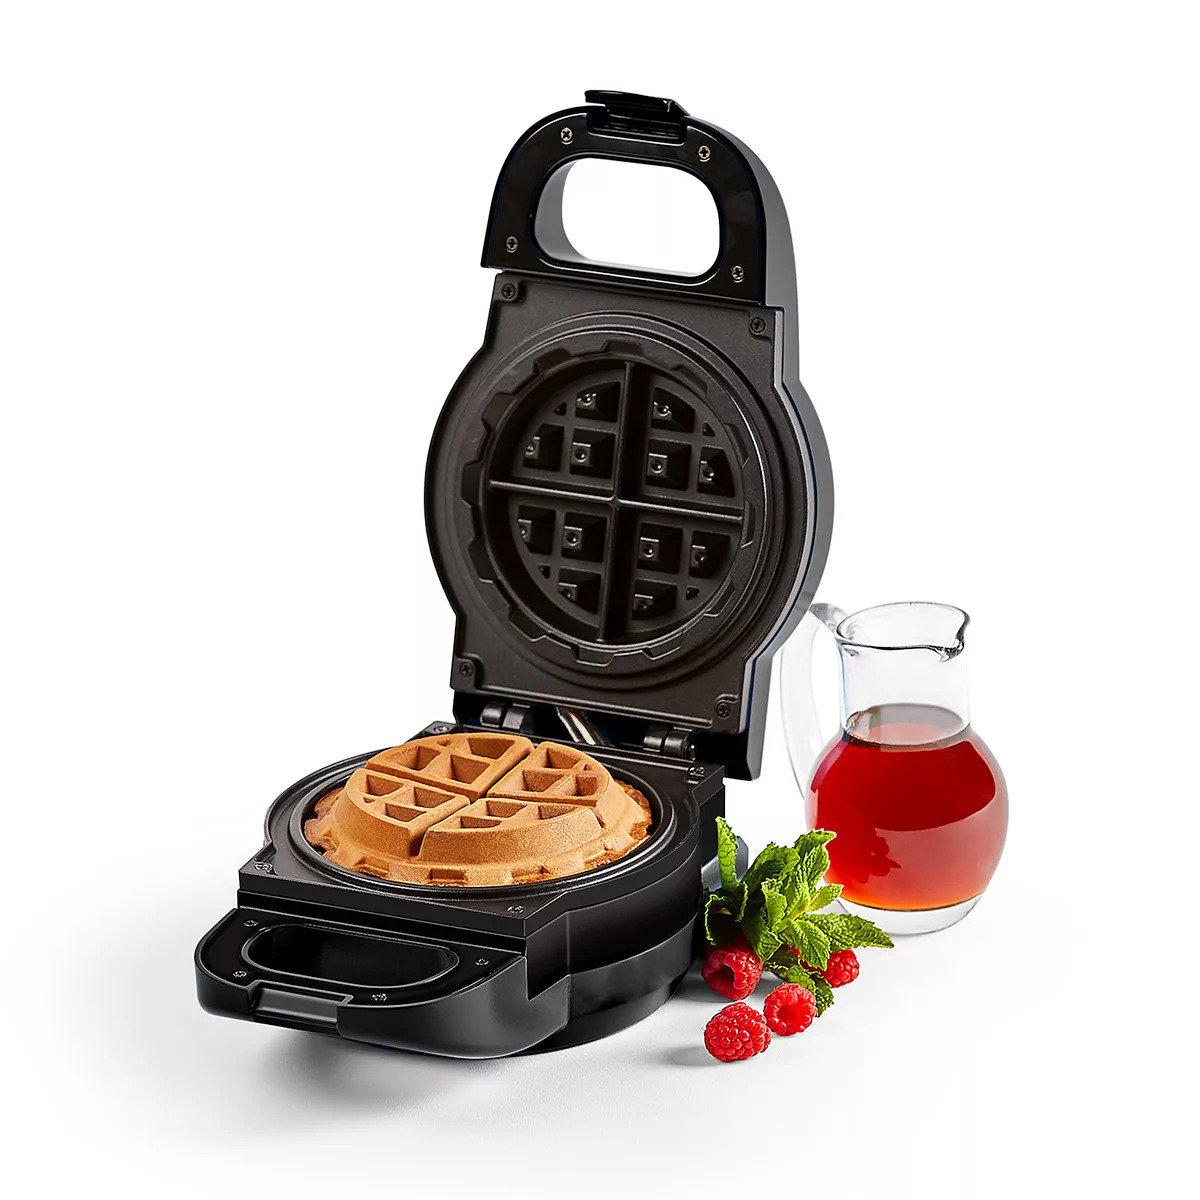 https://jcpenney.scene7.com/is/image/jcpenneyimages/powerxl-waffle-maker-8acea5b4-9e17-4ddb-99c5-7d97ba45f348?scl=1&qlt=75